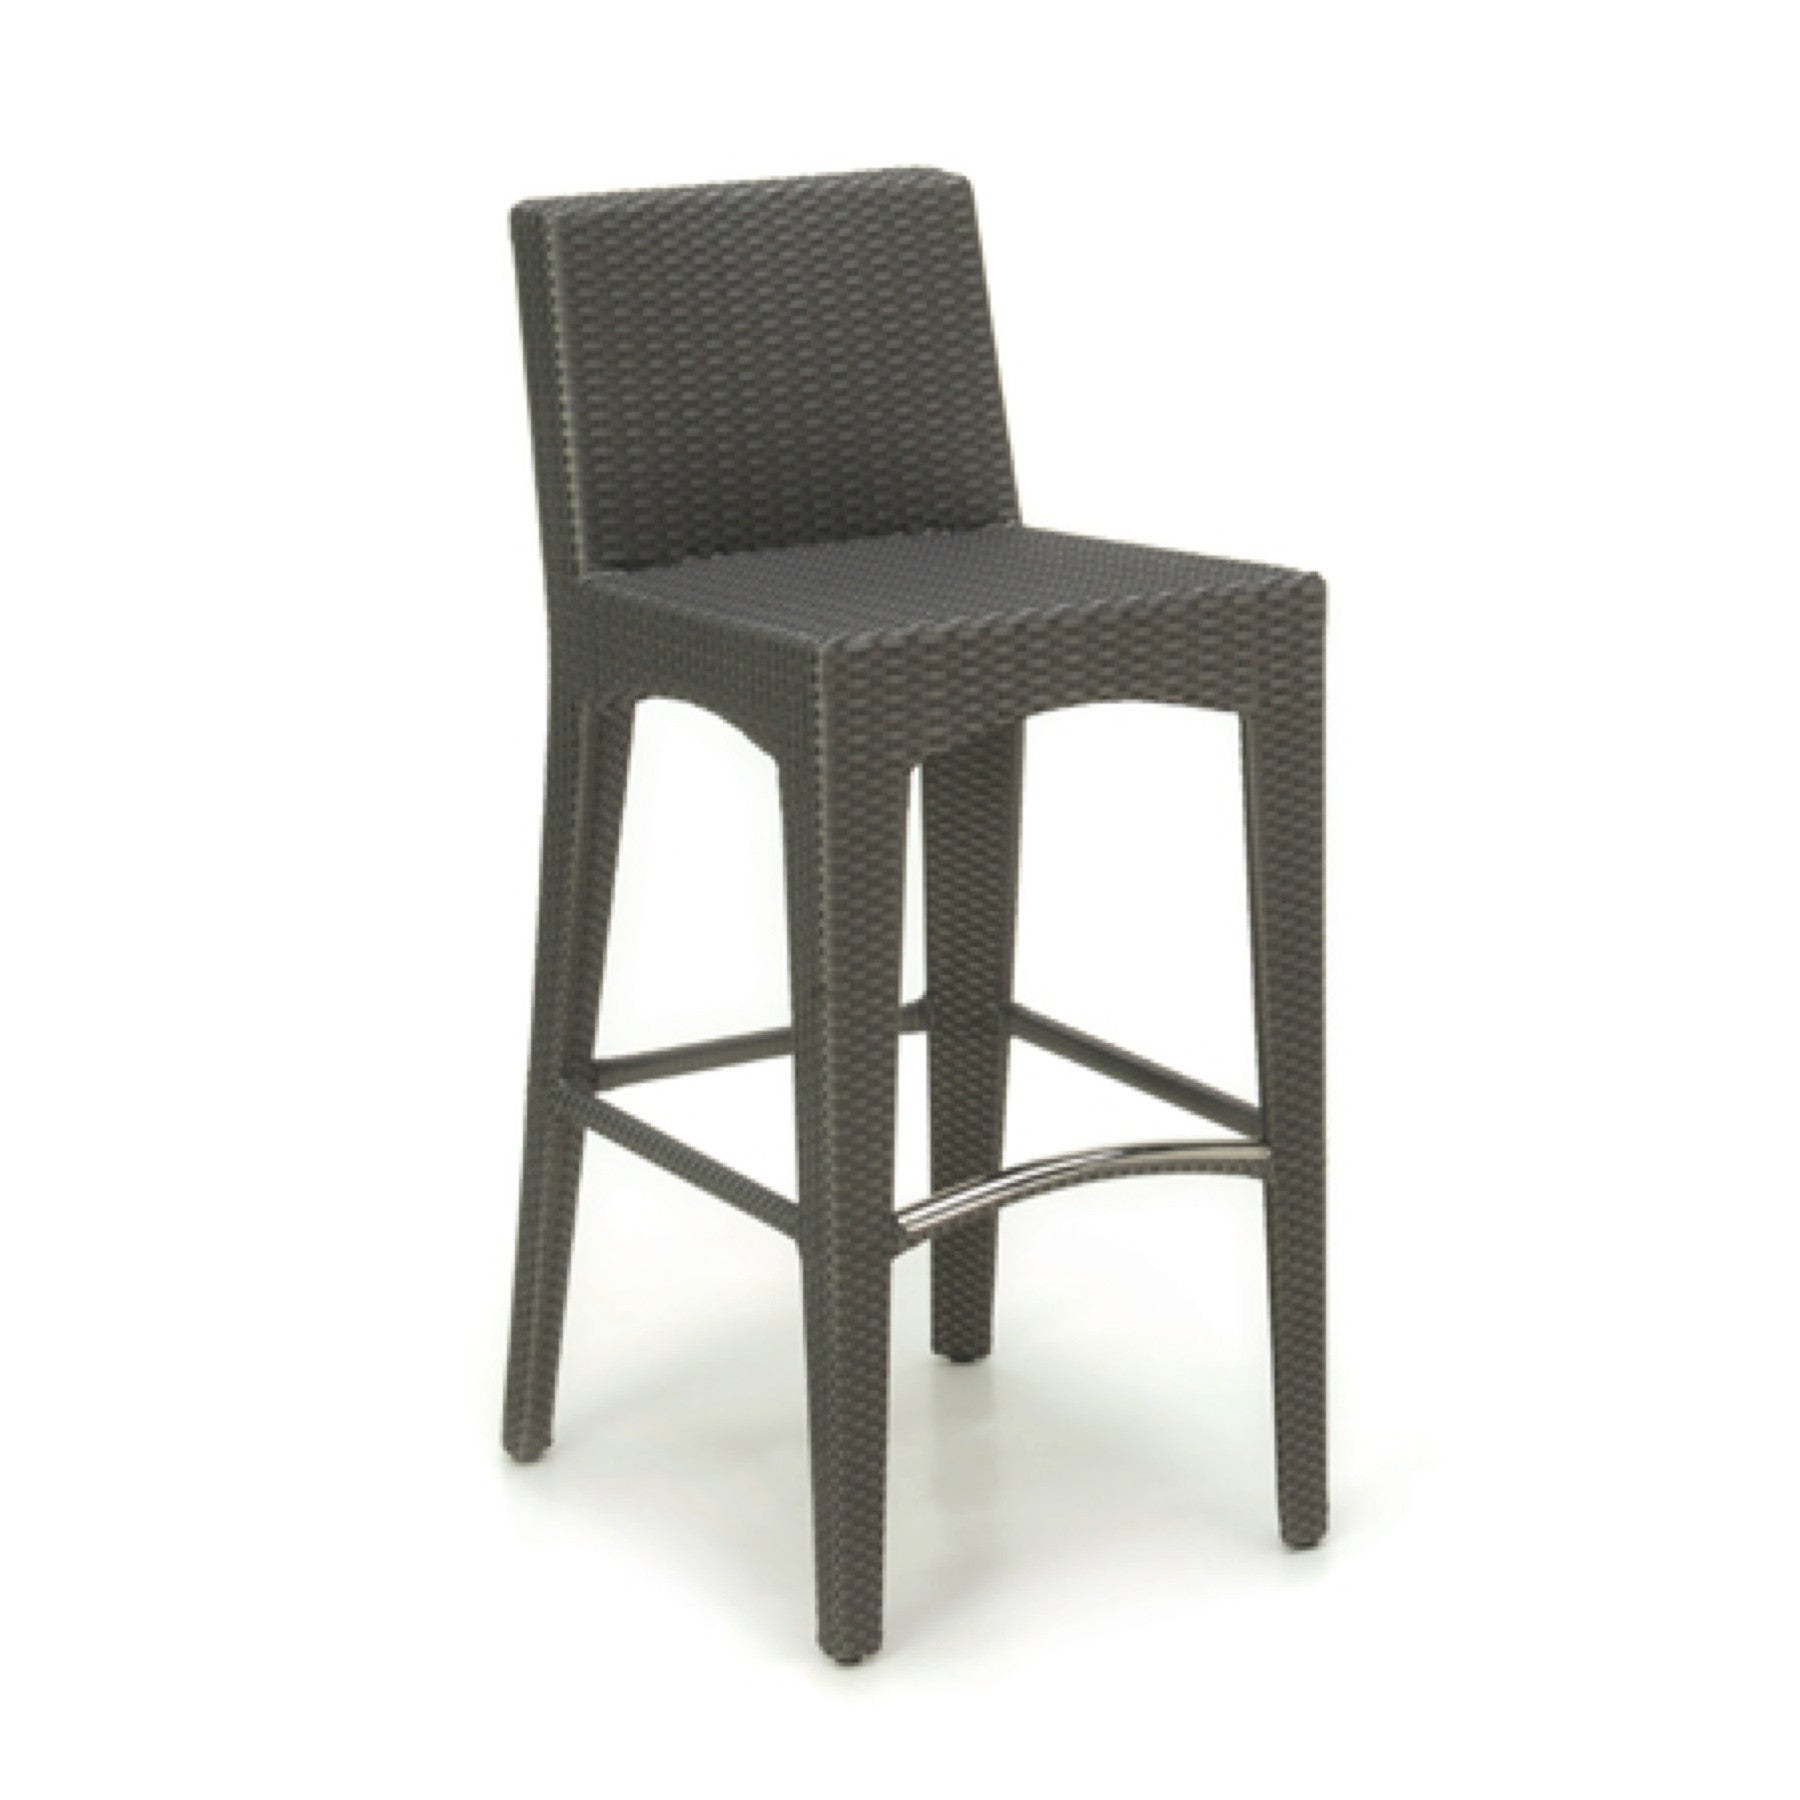 C-TRO24001 OHMM® Tequila Barchair